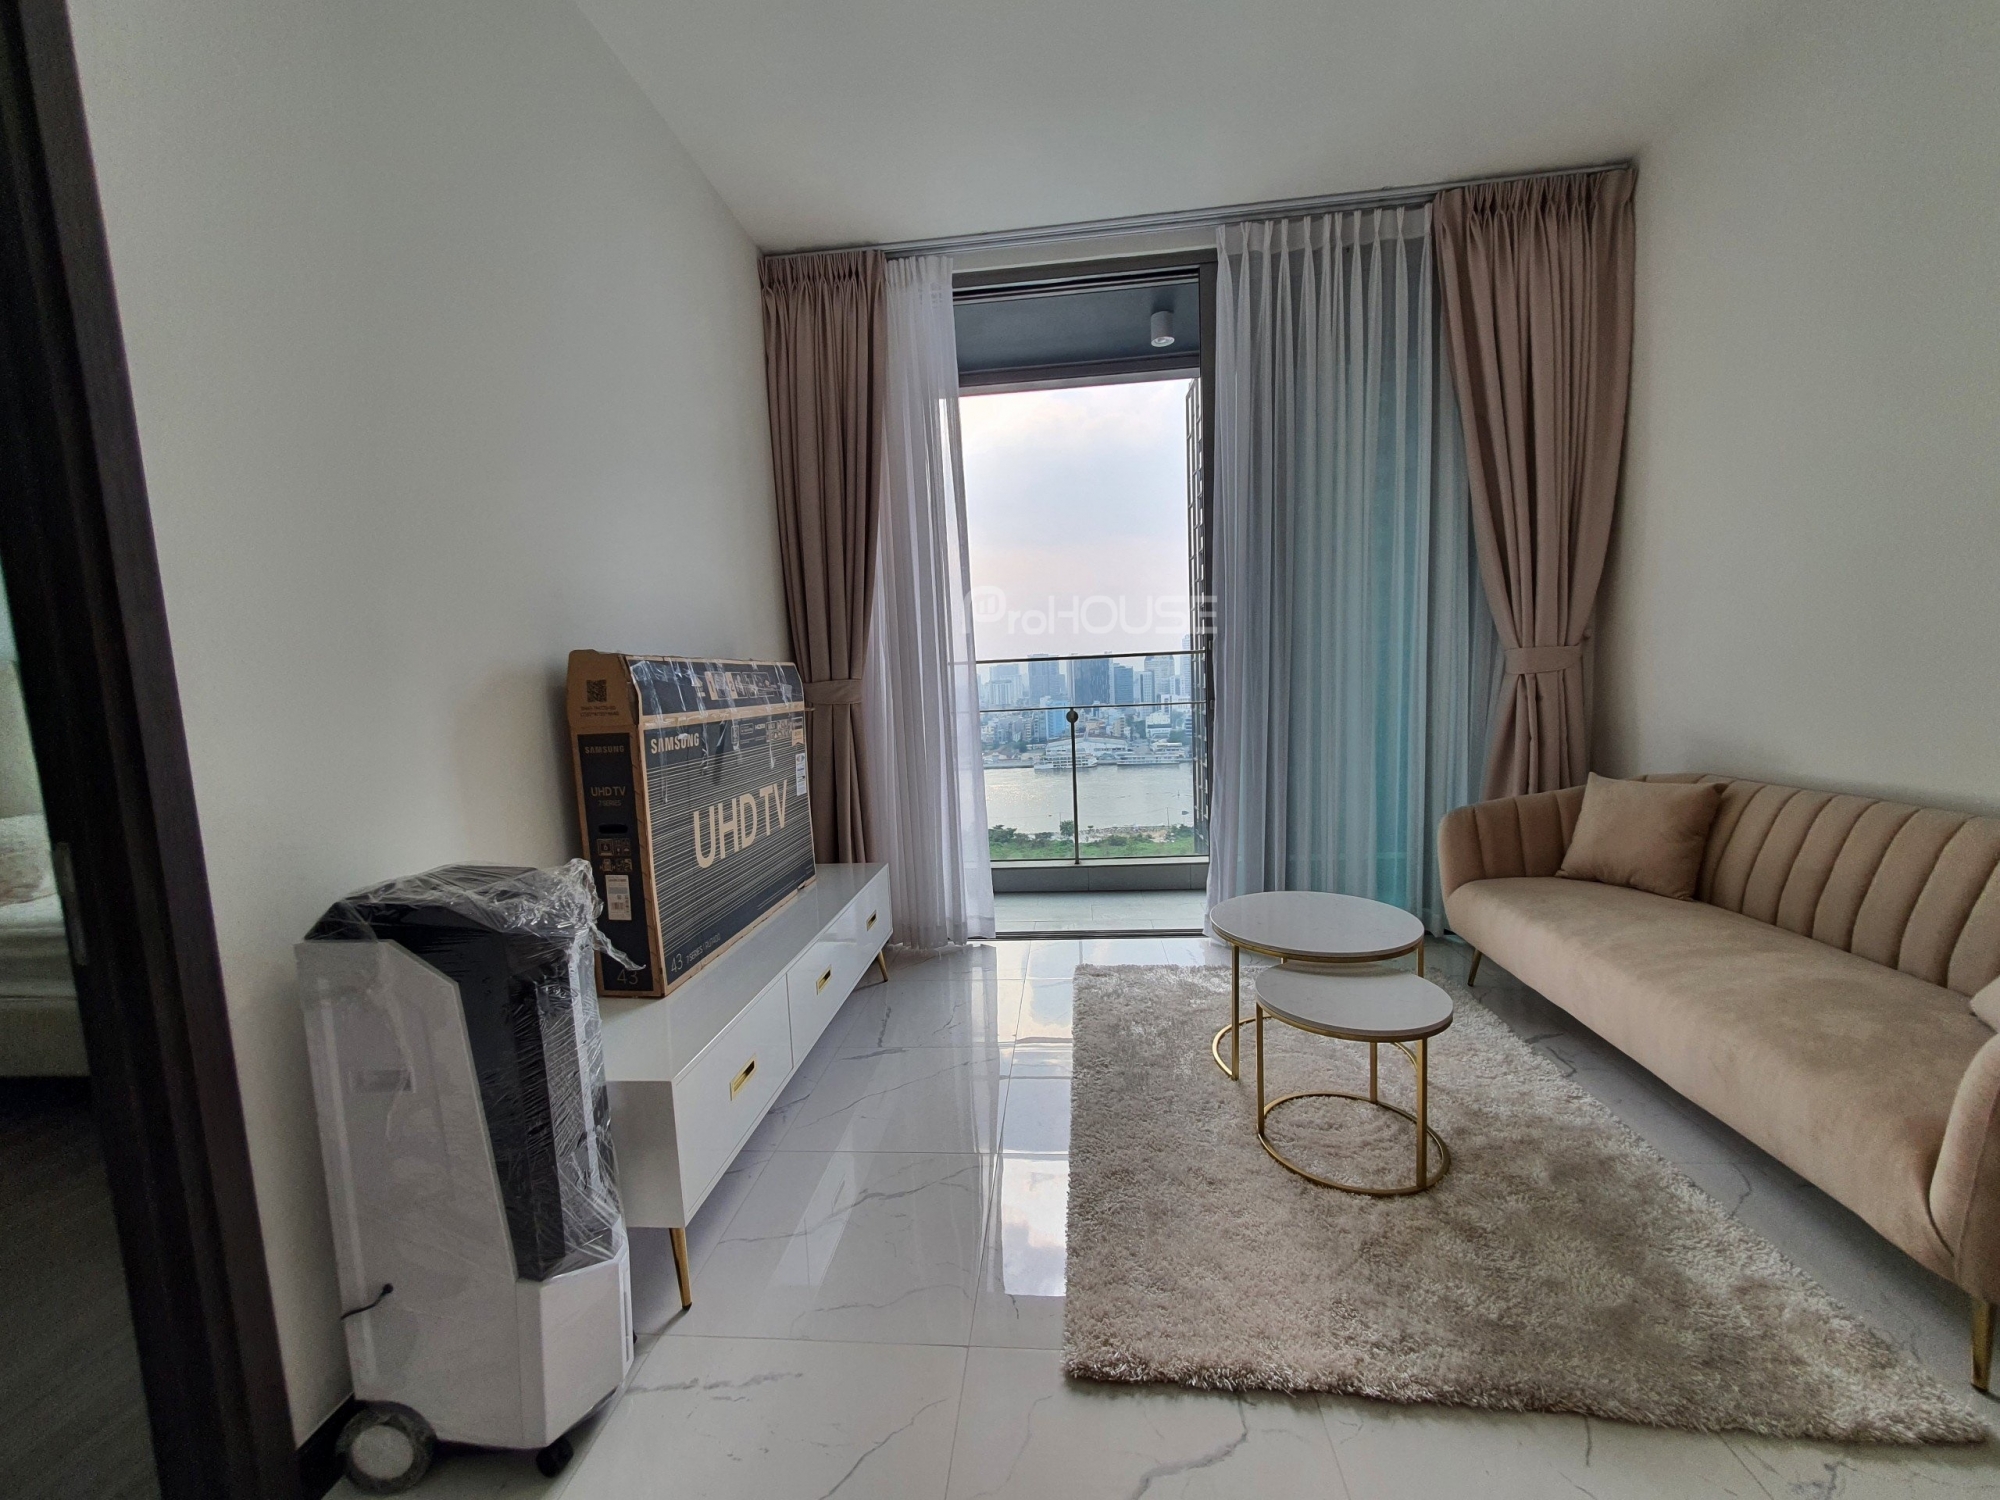 Elegant 1-bedroom apartment for rent in Empire City with high-class furniture